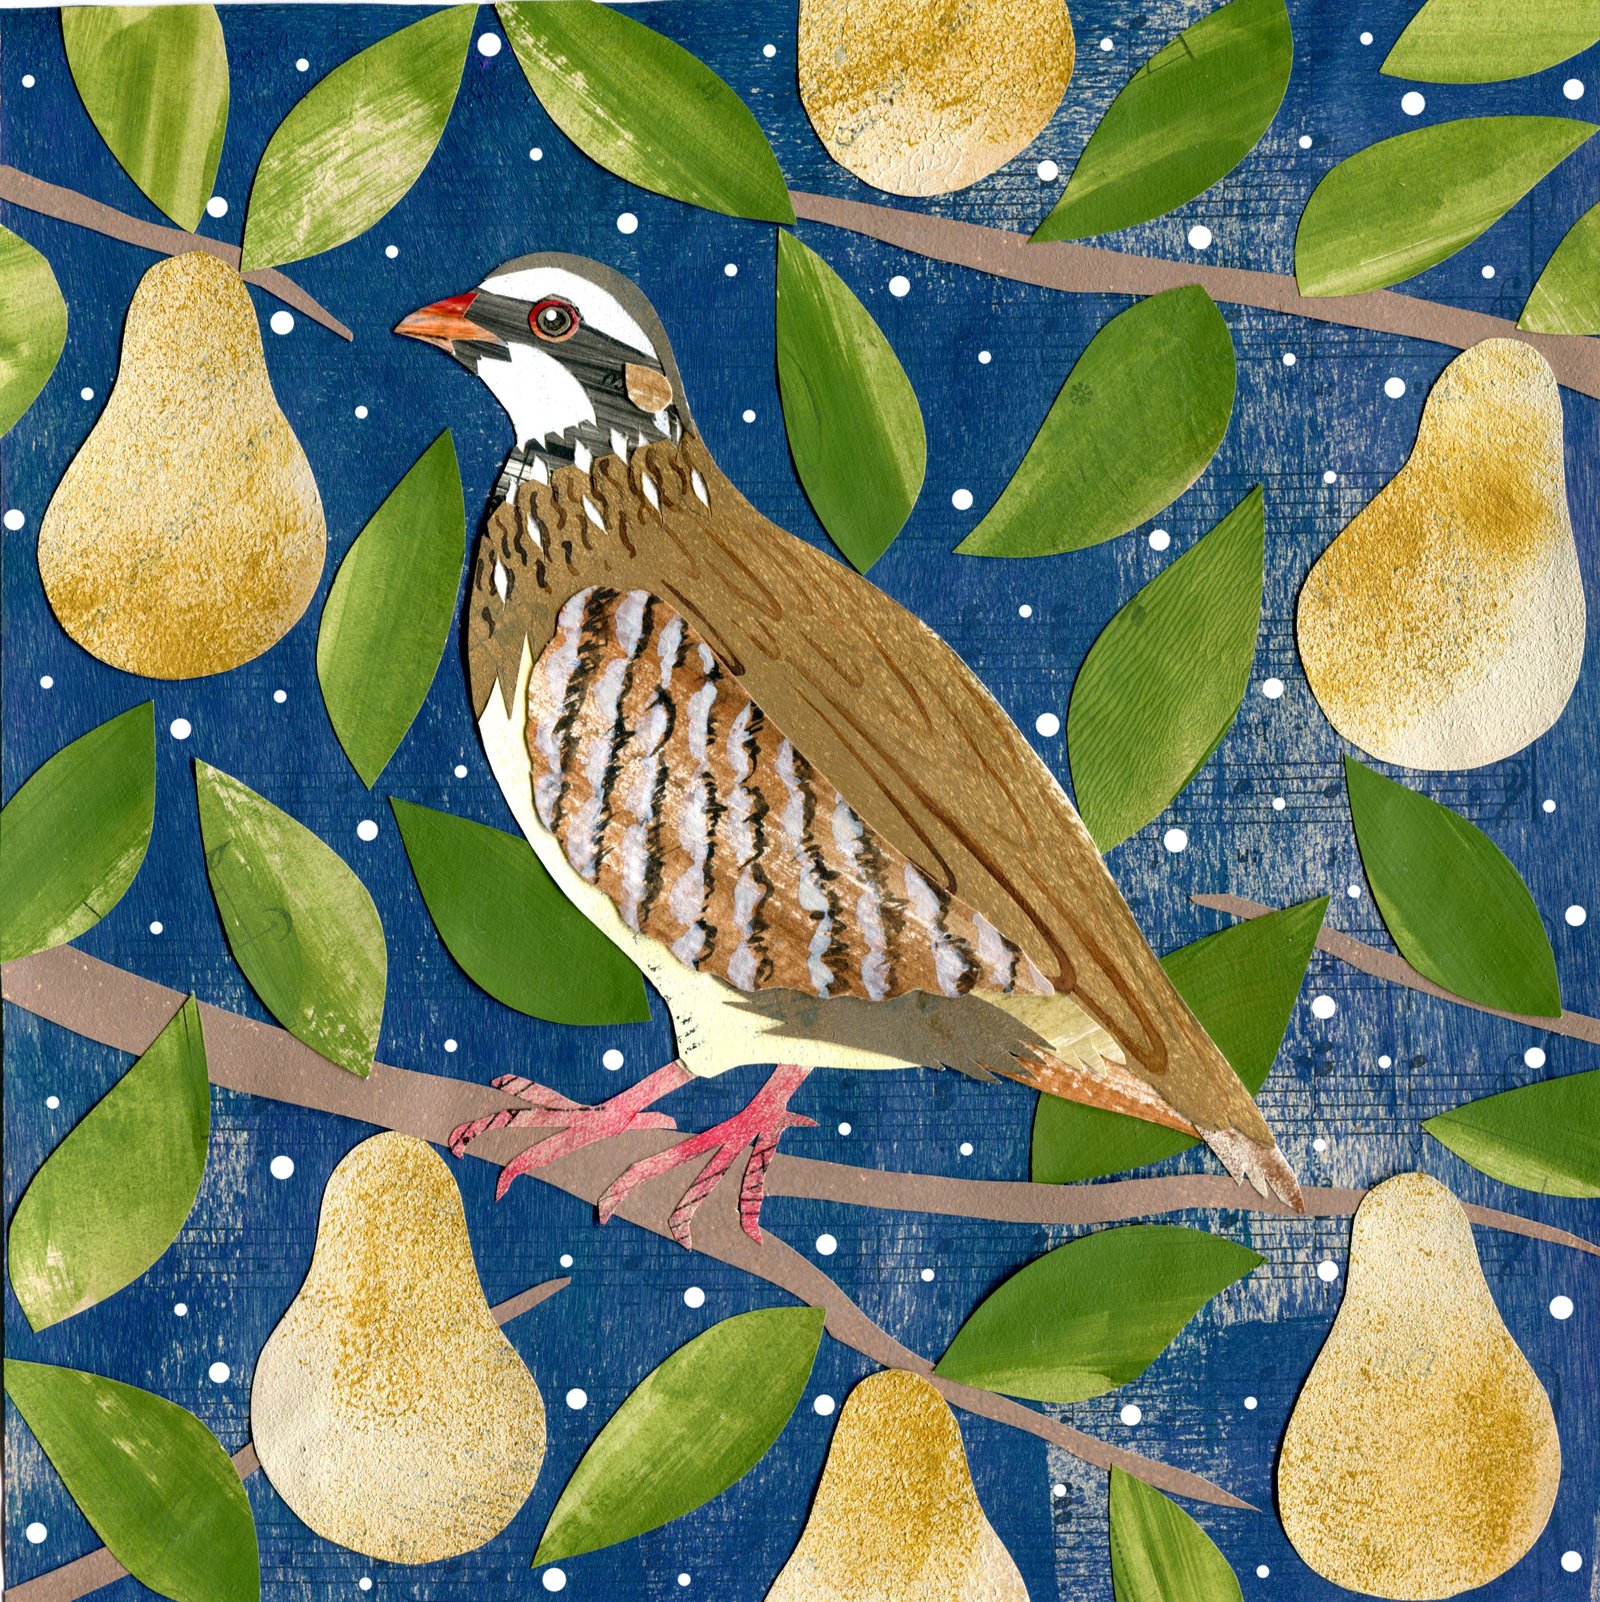 Victoria Whitlam - Partridge in a pear tree